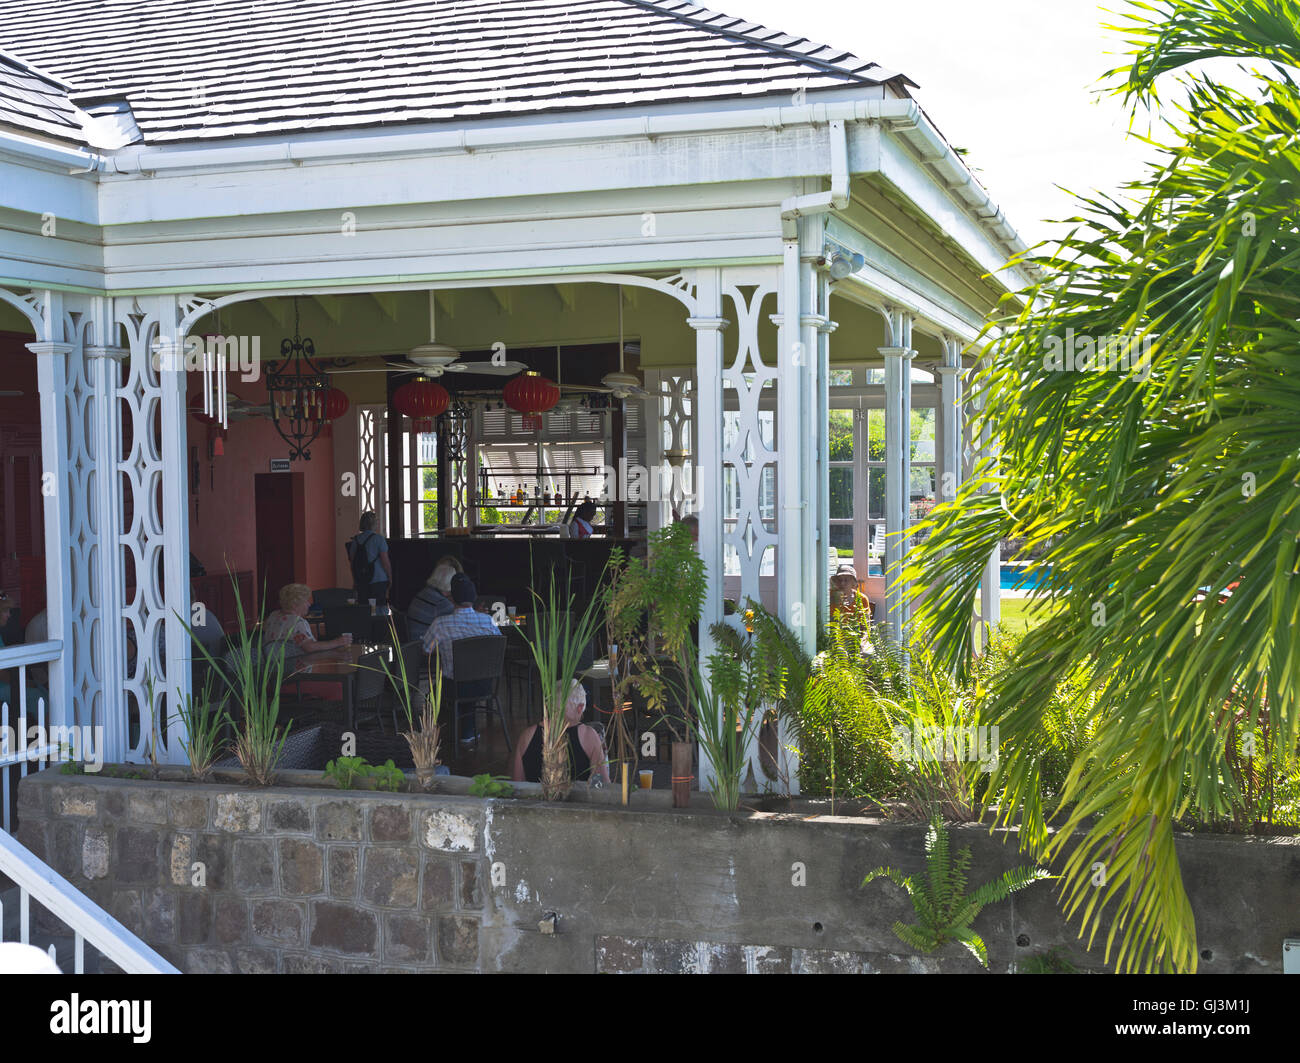 dh Fairview Great House ST KITTS CARIBBEAN Old colonial house tourist bar Stock Photo